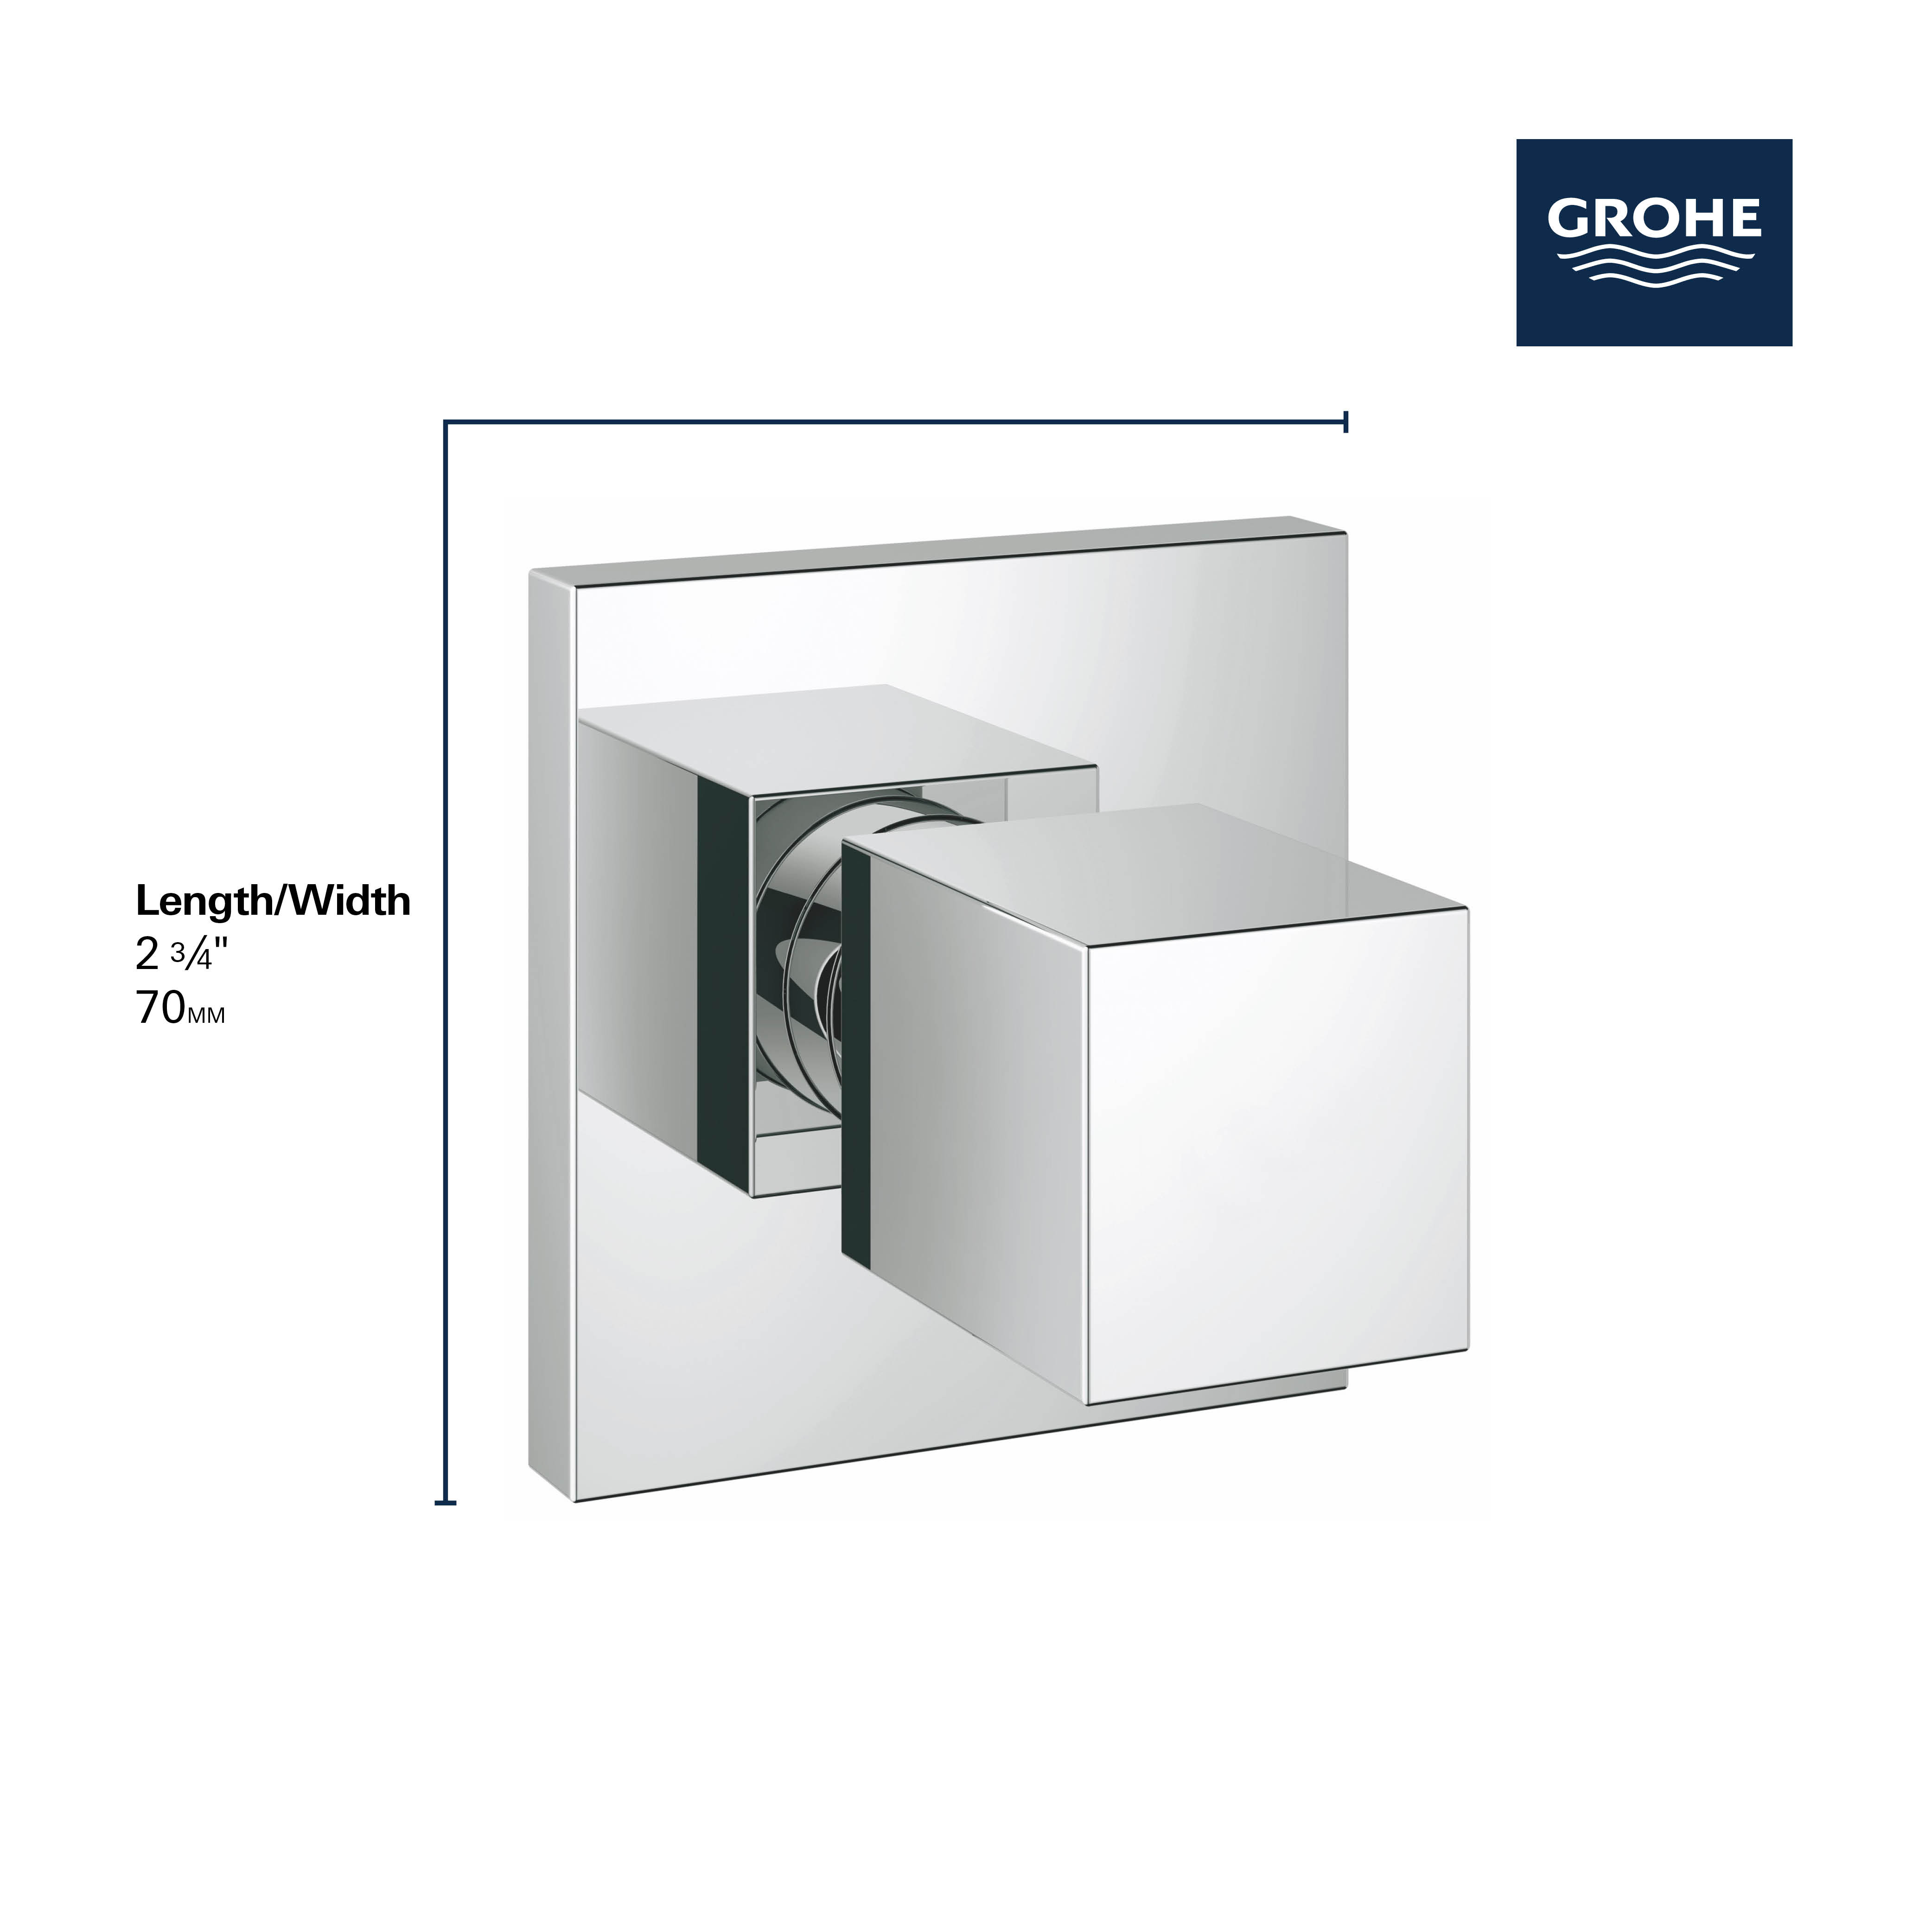 Grohe Eurocube Single-Handle Volume Control Valve Trim Only in Starlight Chrome - image 3 of 4